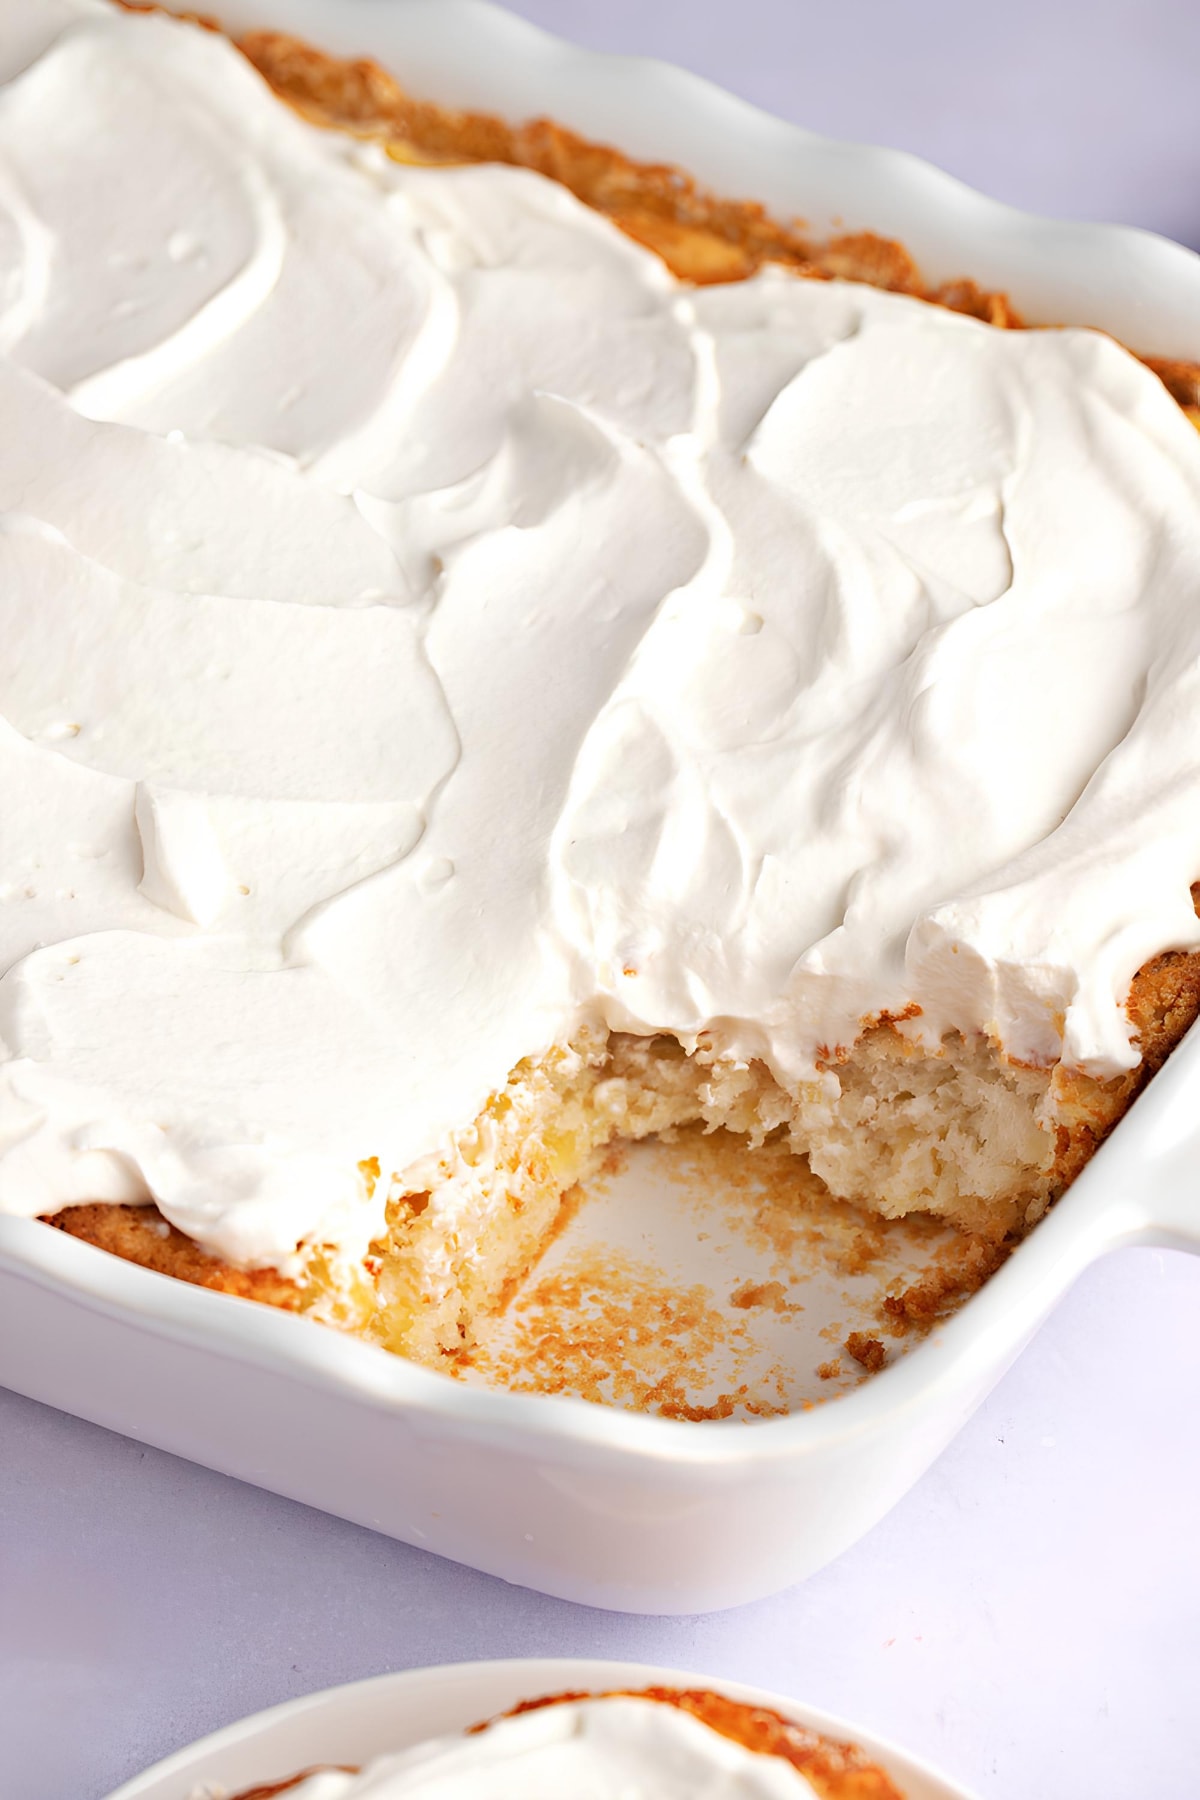 Homemade Pineapple Angel Food Cake with Whipped Cream in a White Casserole